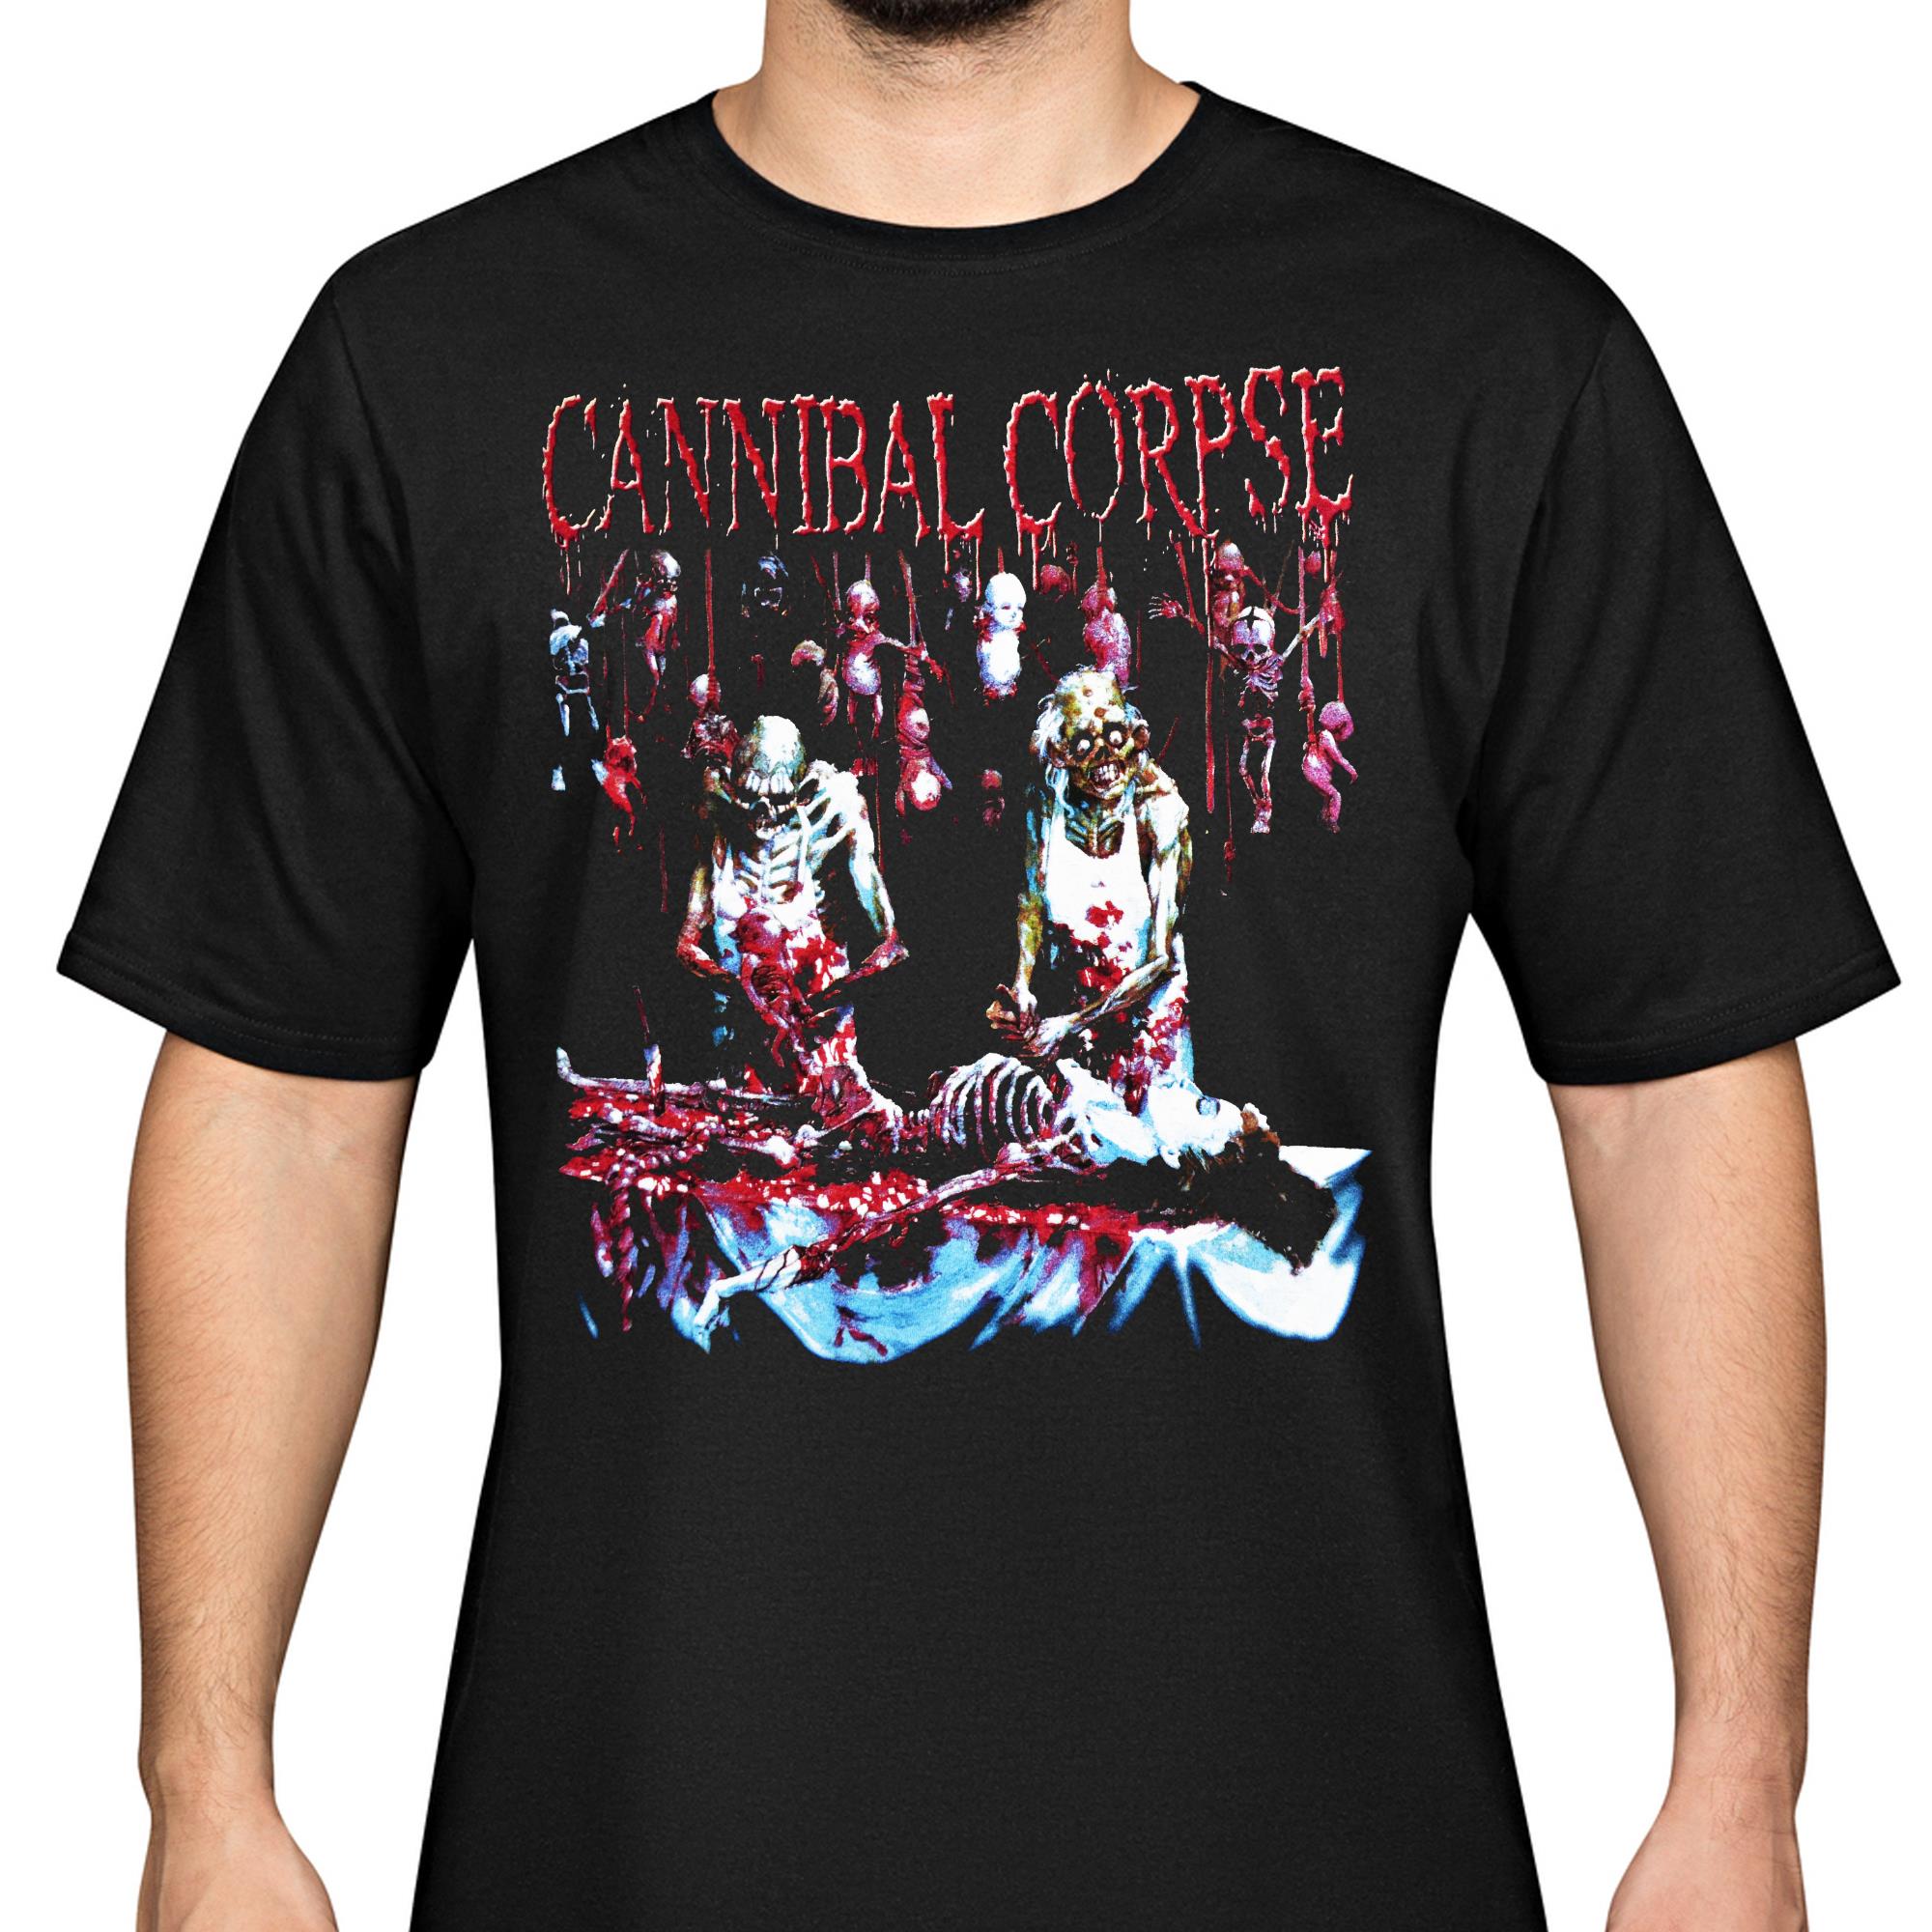 Cannibal Corpse Butchered At Birth skull logo t-shirt unisex S to 5XL 